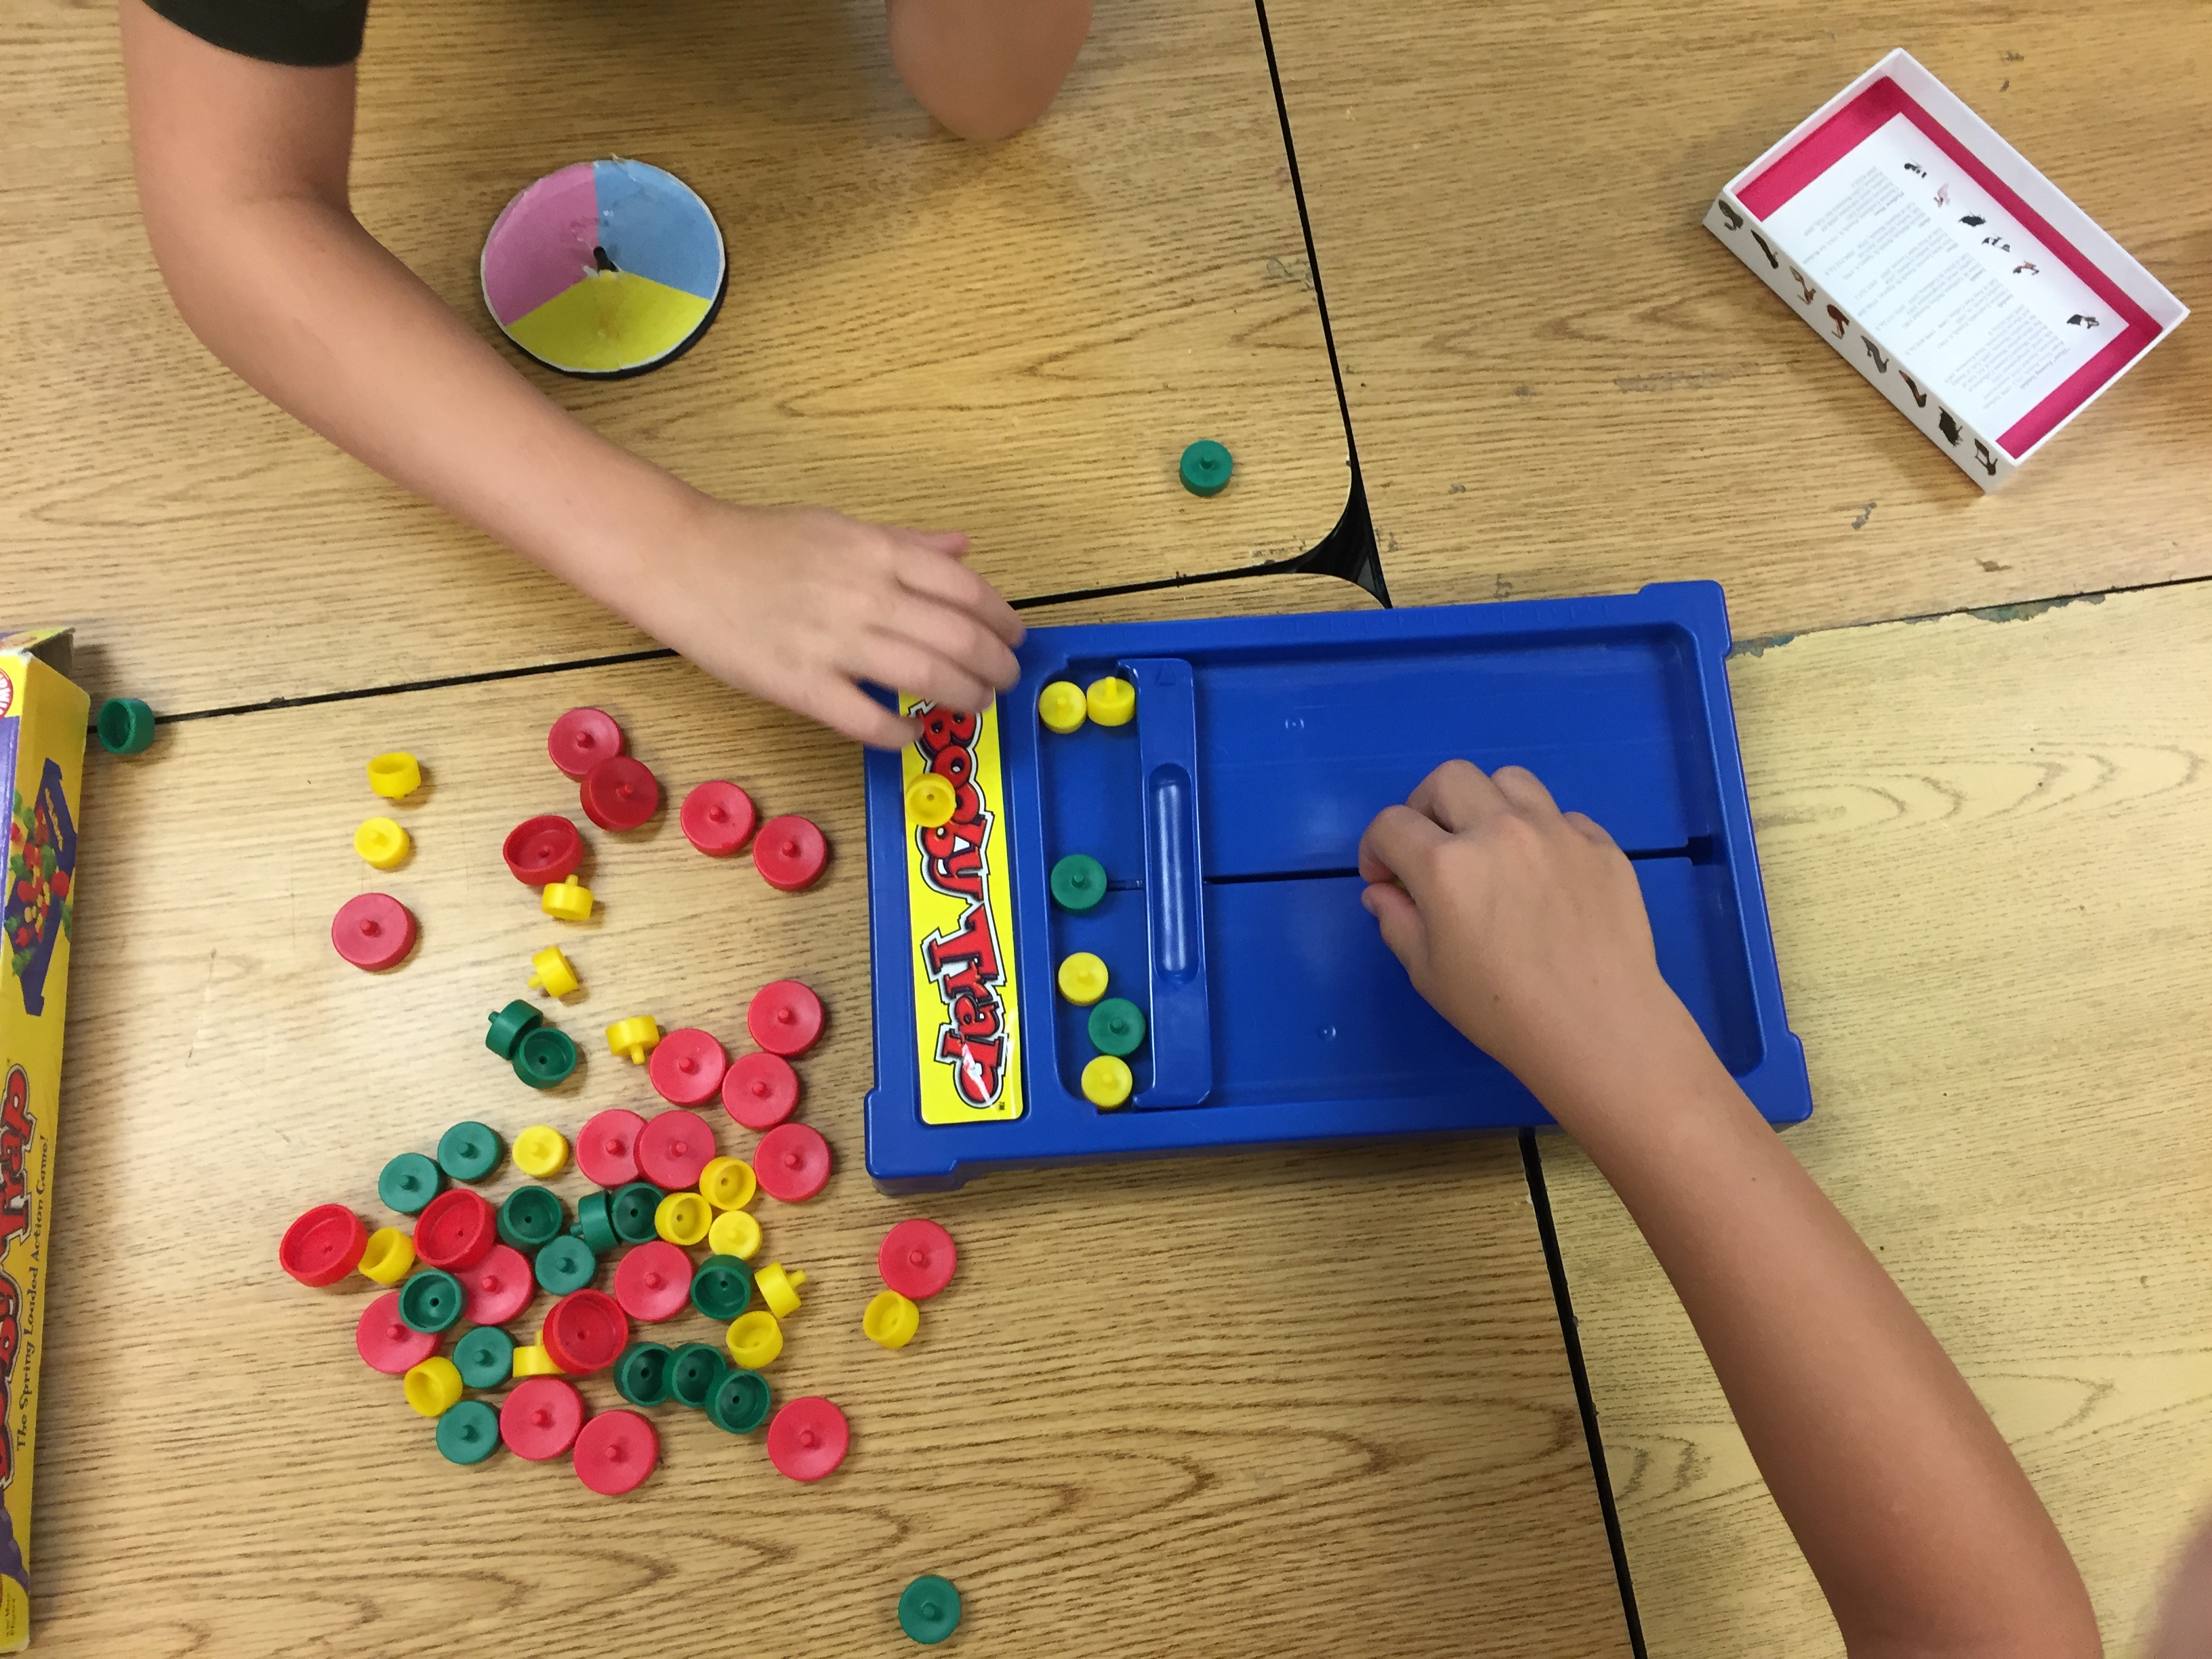 1st graders play a "Booby Trap" game, removing different size round pieces one-by-one without upsetting the board.